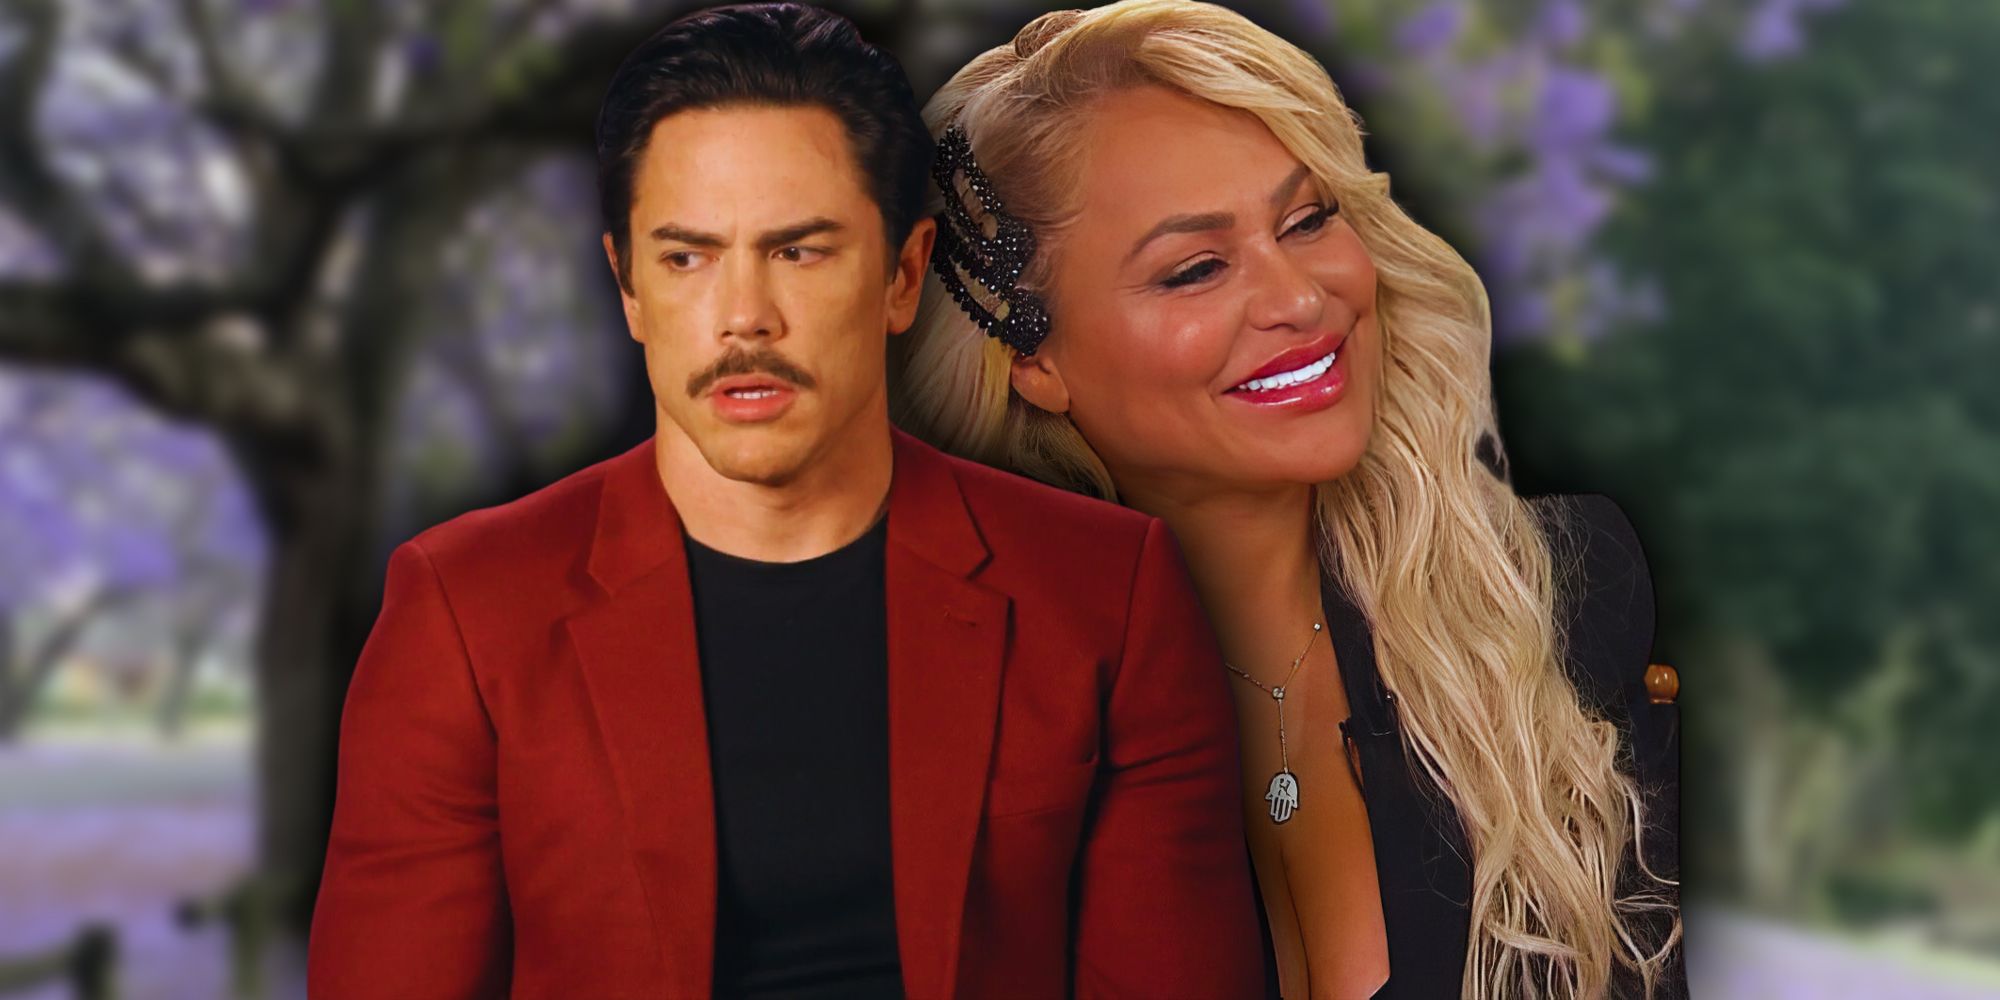 Vanderpump Rules' Tom Sandoval looking serious and 90 Day Fiance's Darcey Silva smiling